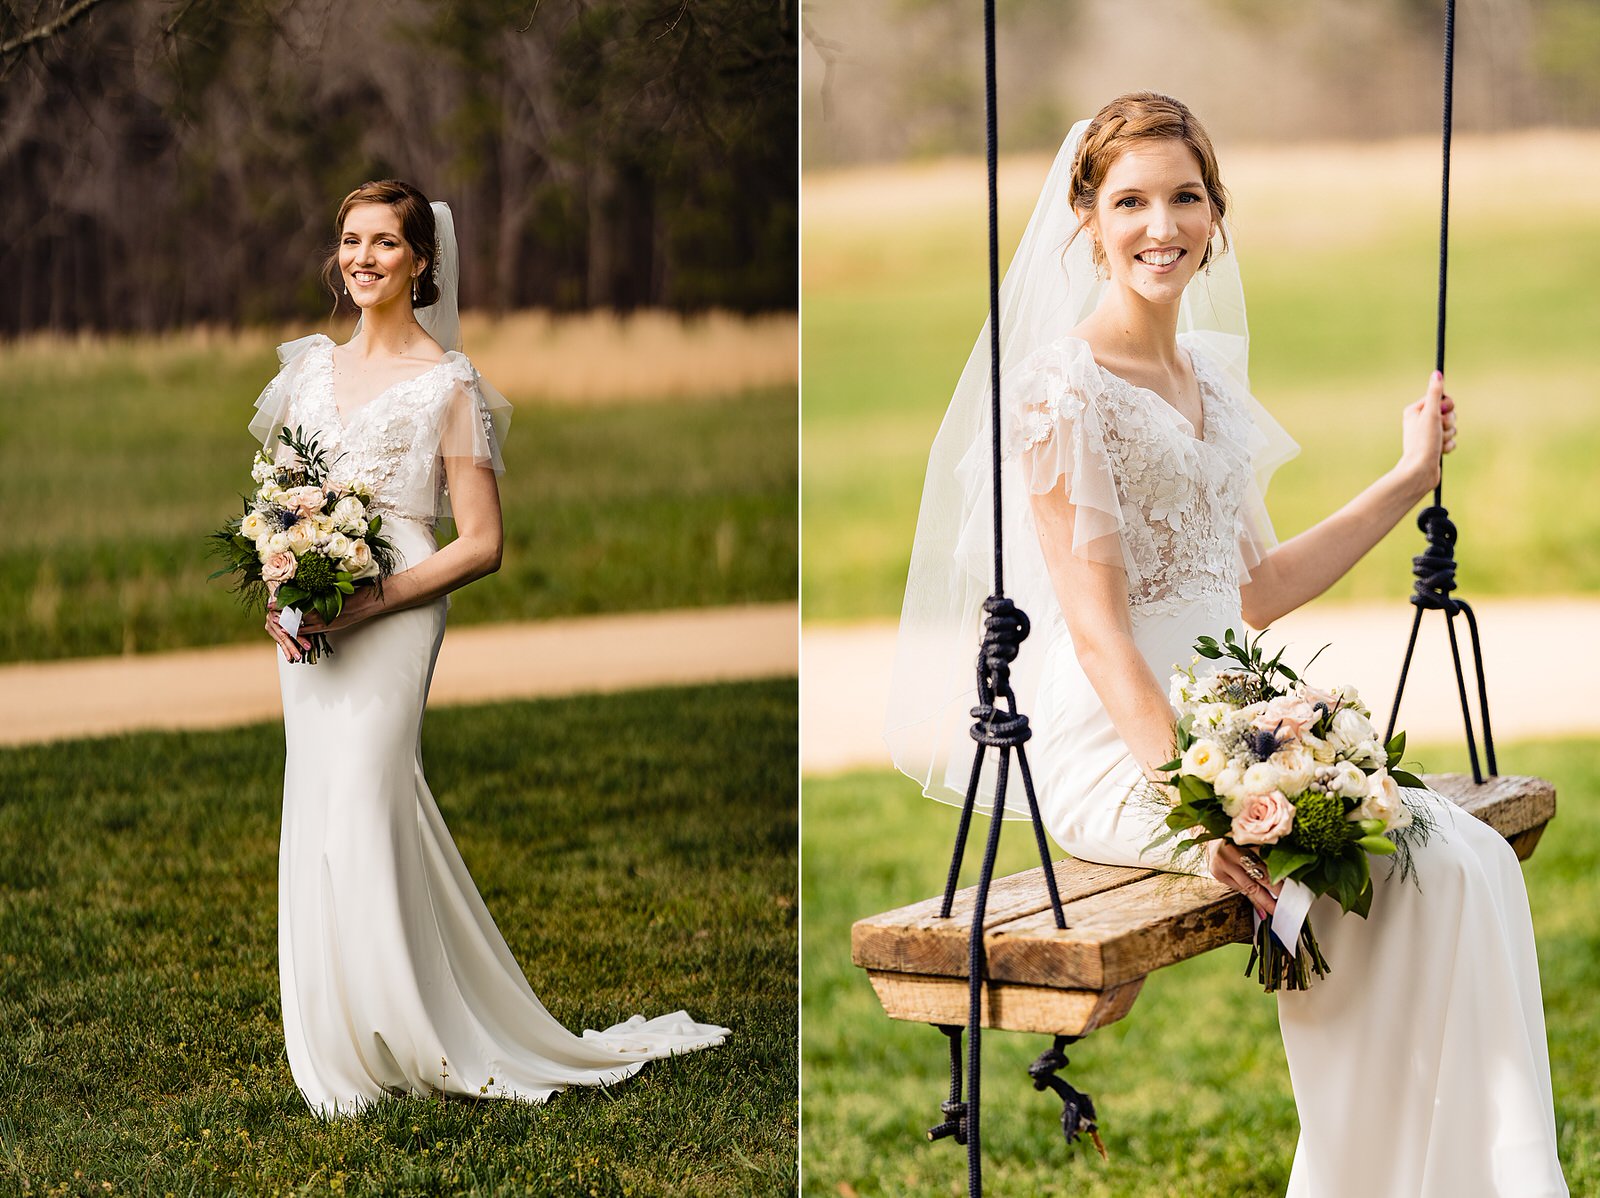 Portraits of a bride at The Meadows Raleigh by Raleigh wedding photographers